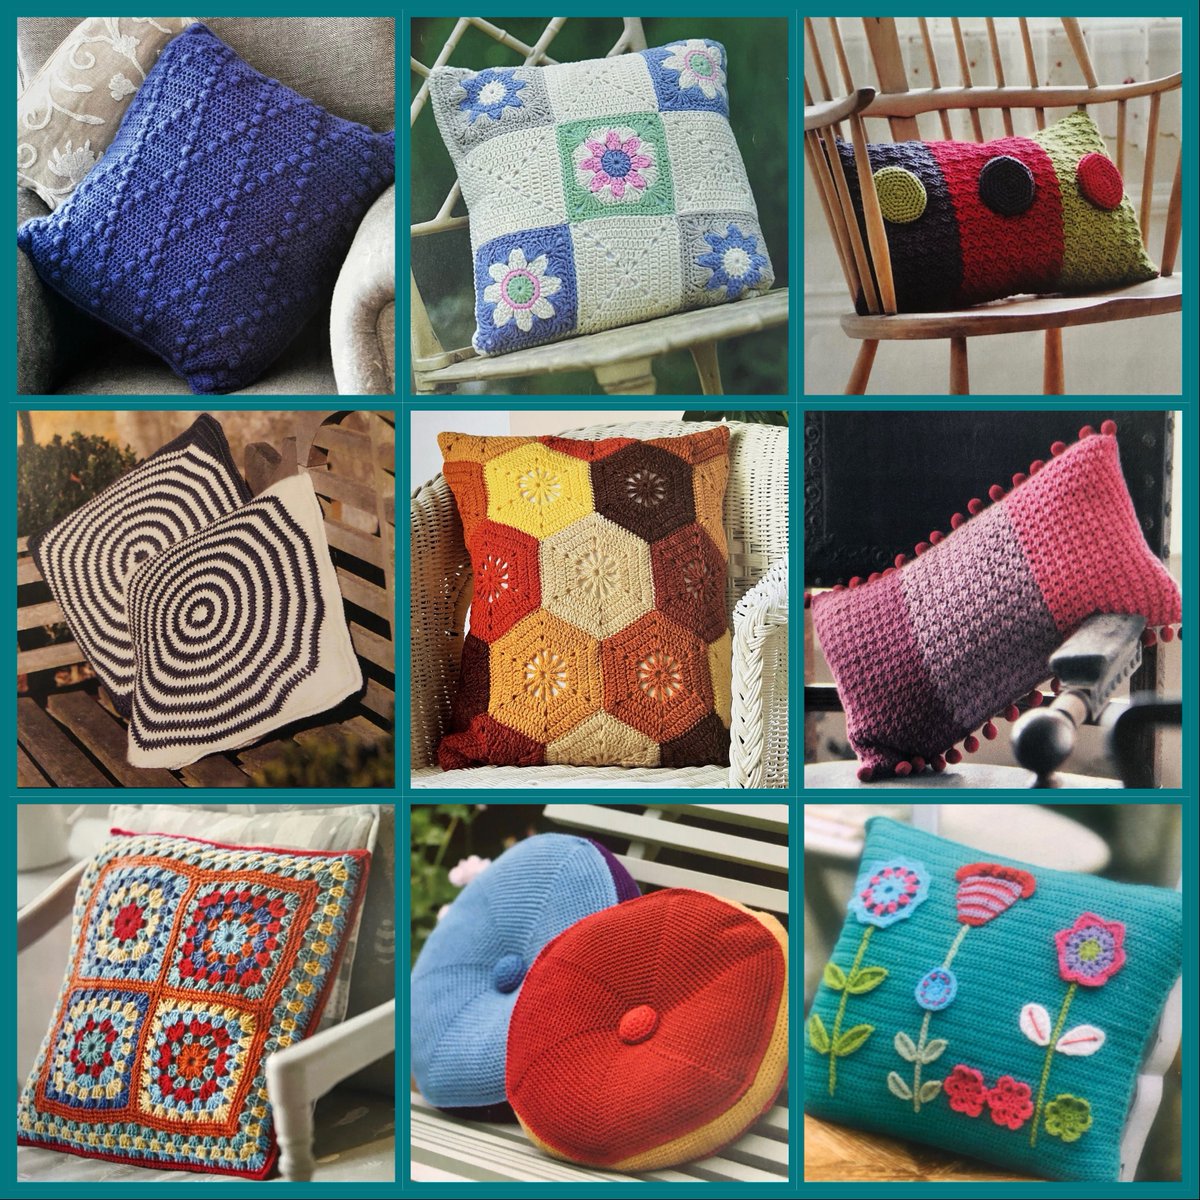 Planning on having a relaxing weekend? 
Why not crochet a cushion or two 🧶😌
Here are a few cushion Patterns in my Etsy shop ☺️
#yarn #crochet #wip #weekend #MHHSBD #crafts #cushions #gifts #quirky #random #magic #craftbizparty #yarncrafts #relaxing etsy.com/uk/shop/DWCroc…